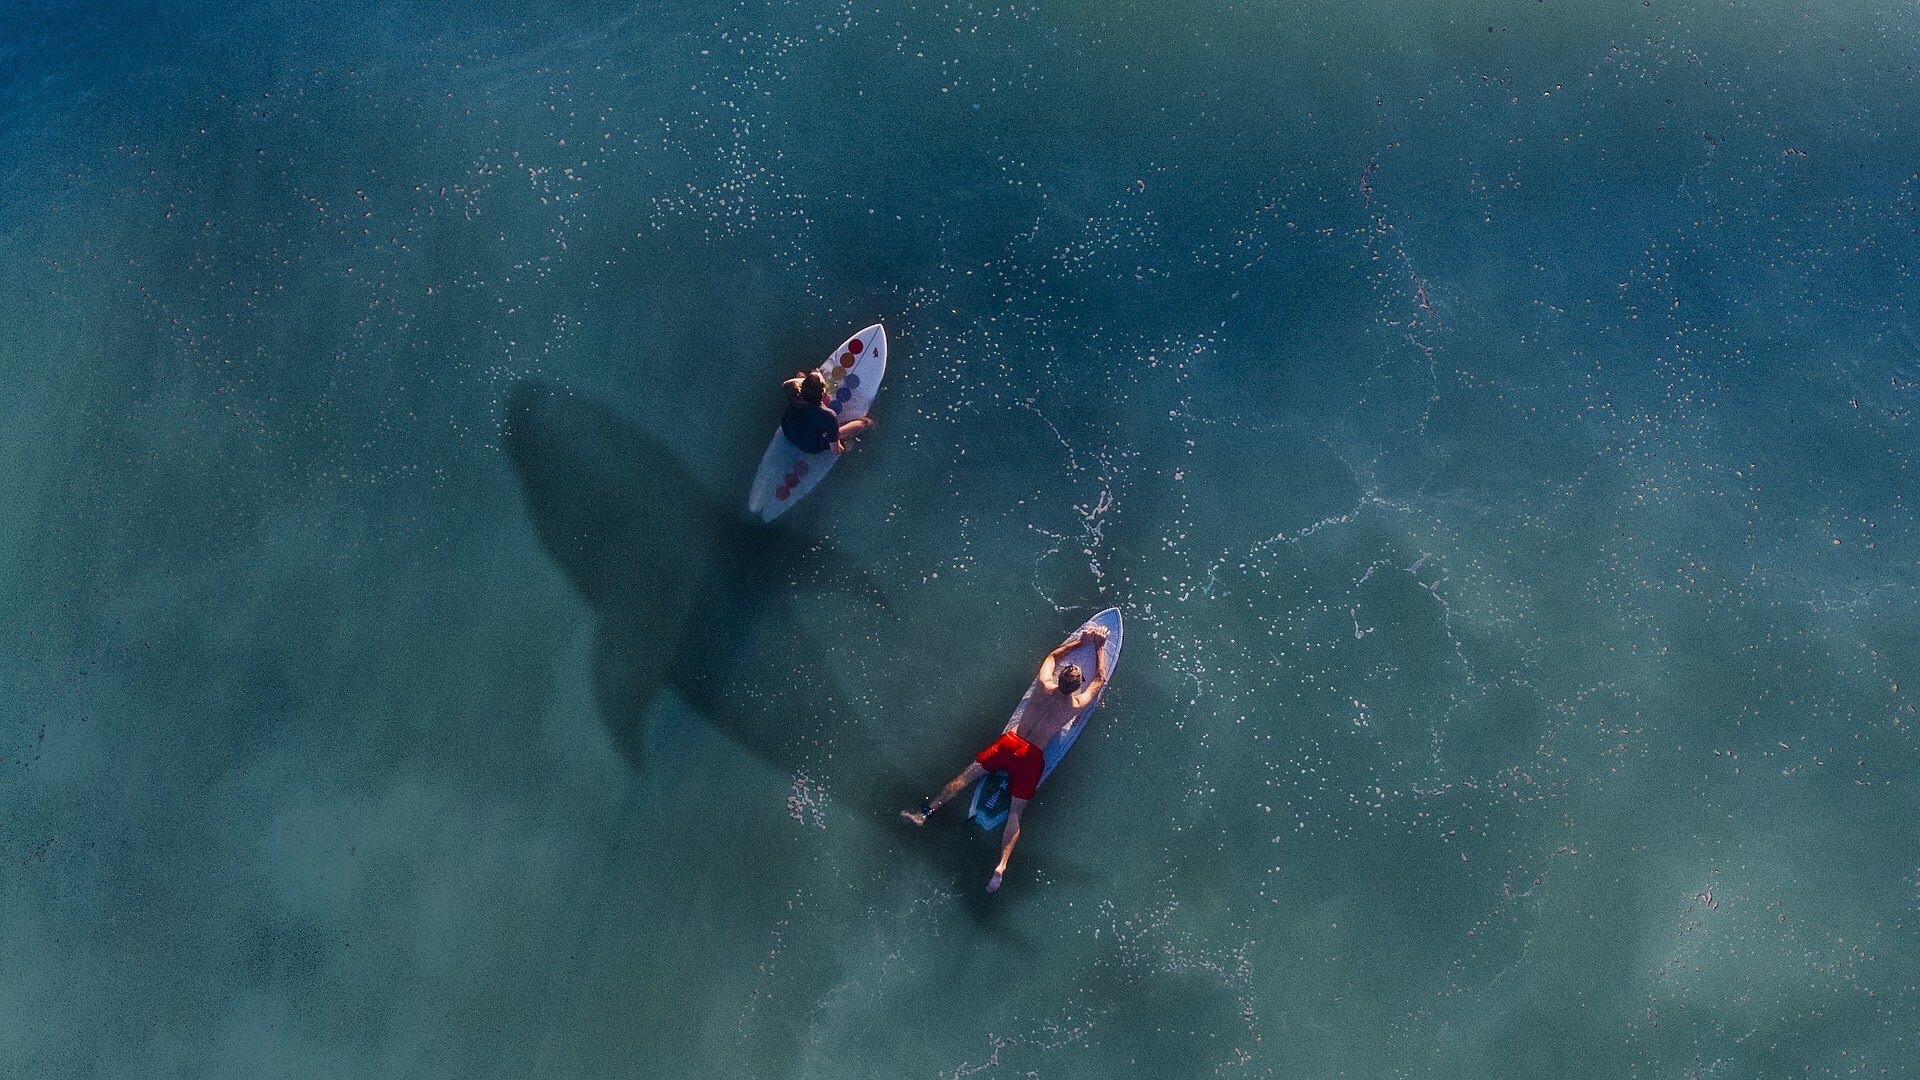 Shark swims in the water underneath two surfers